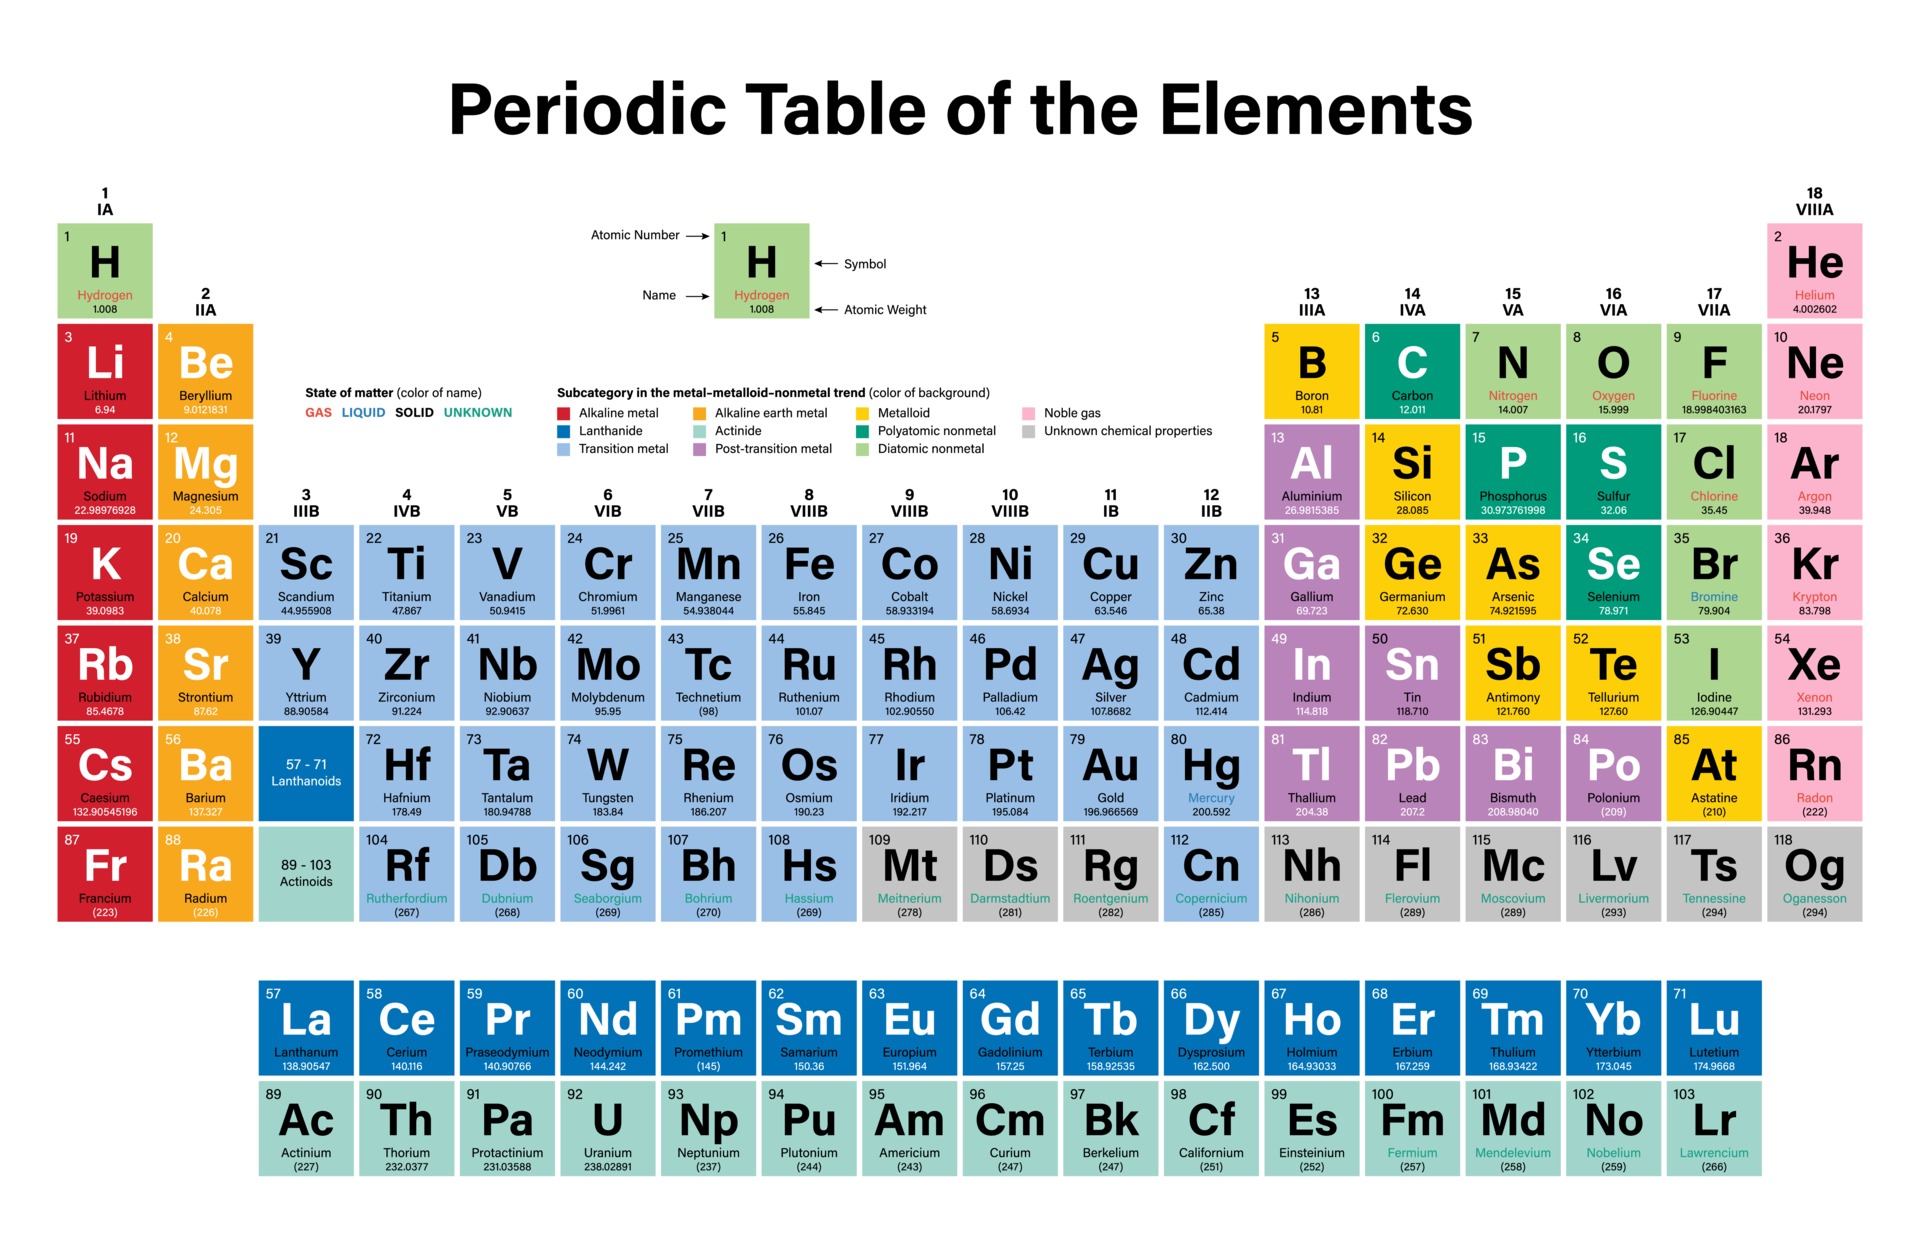 Period 8. Periodic Table of elements. Mendeleev Table of elements. Table of elements with Atomic number. Table of Chemical elements.